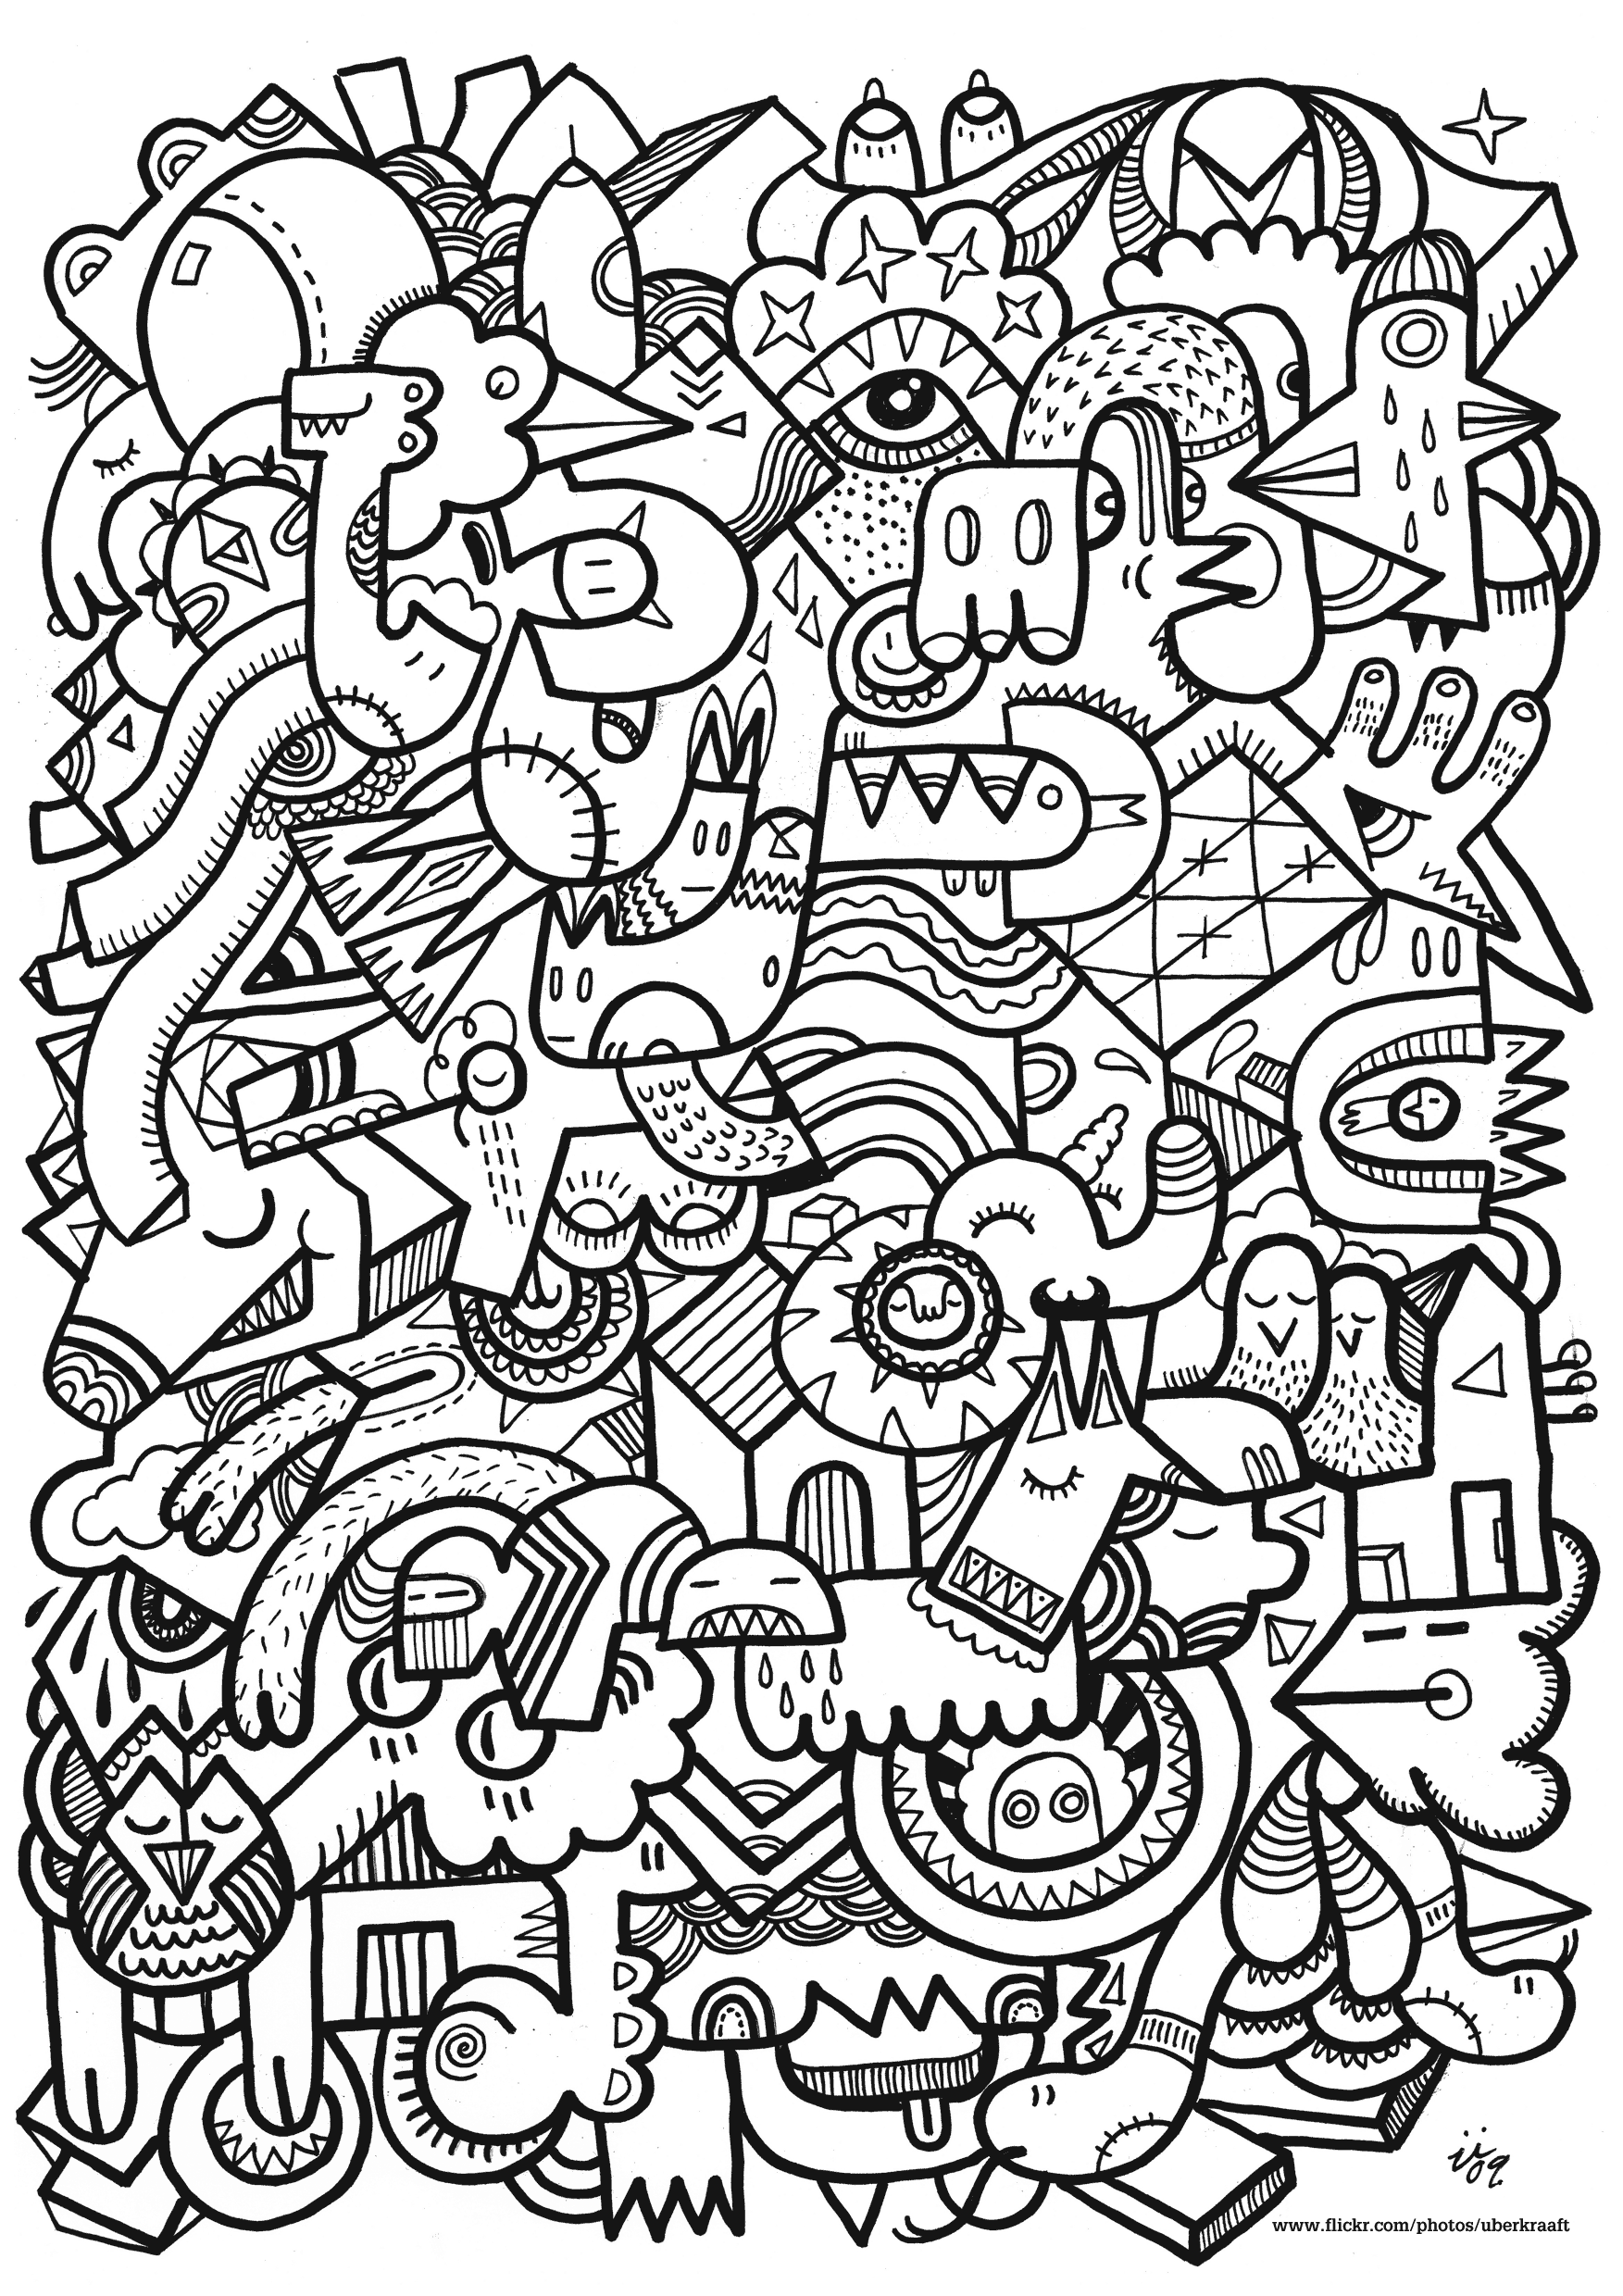 Download To color for children - Adult Kids Coloring Pages